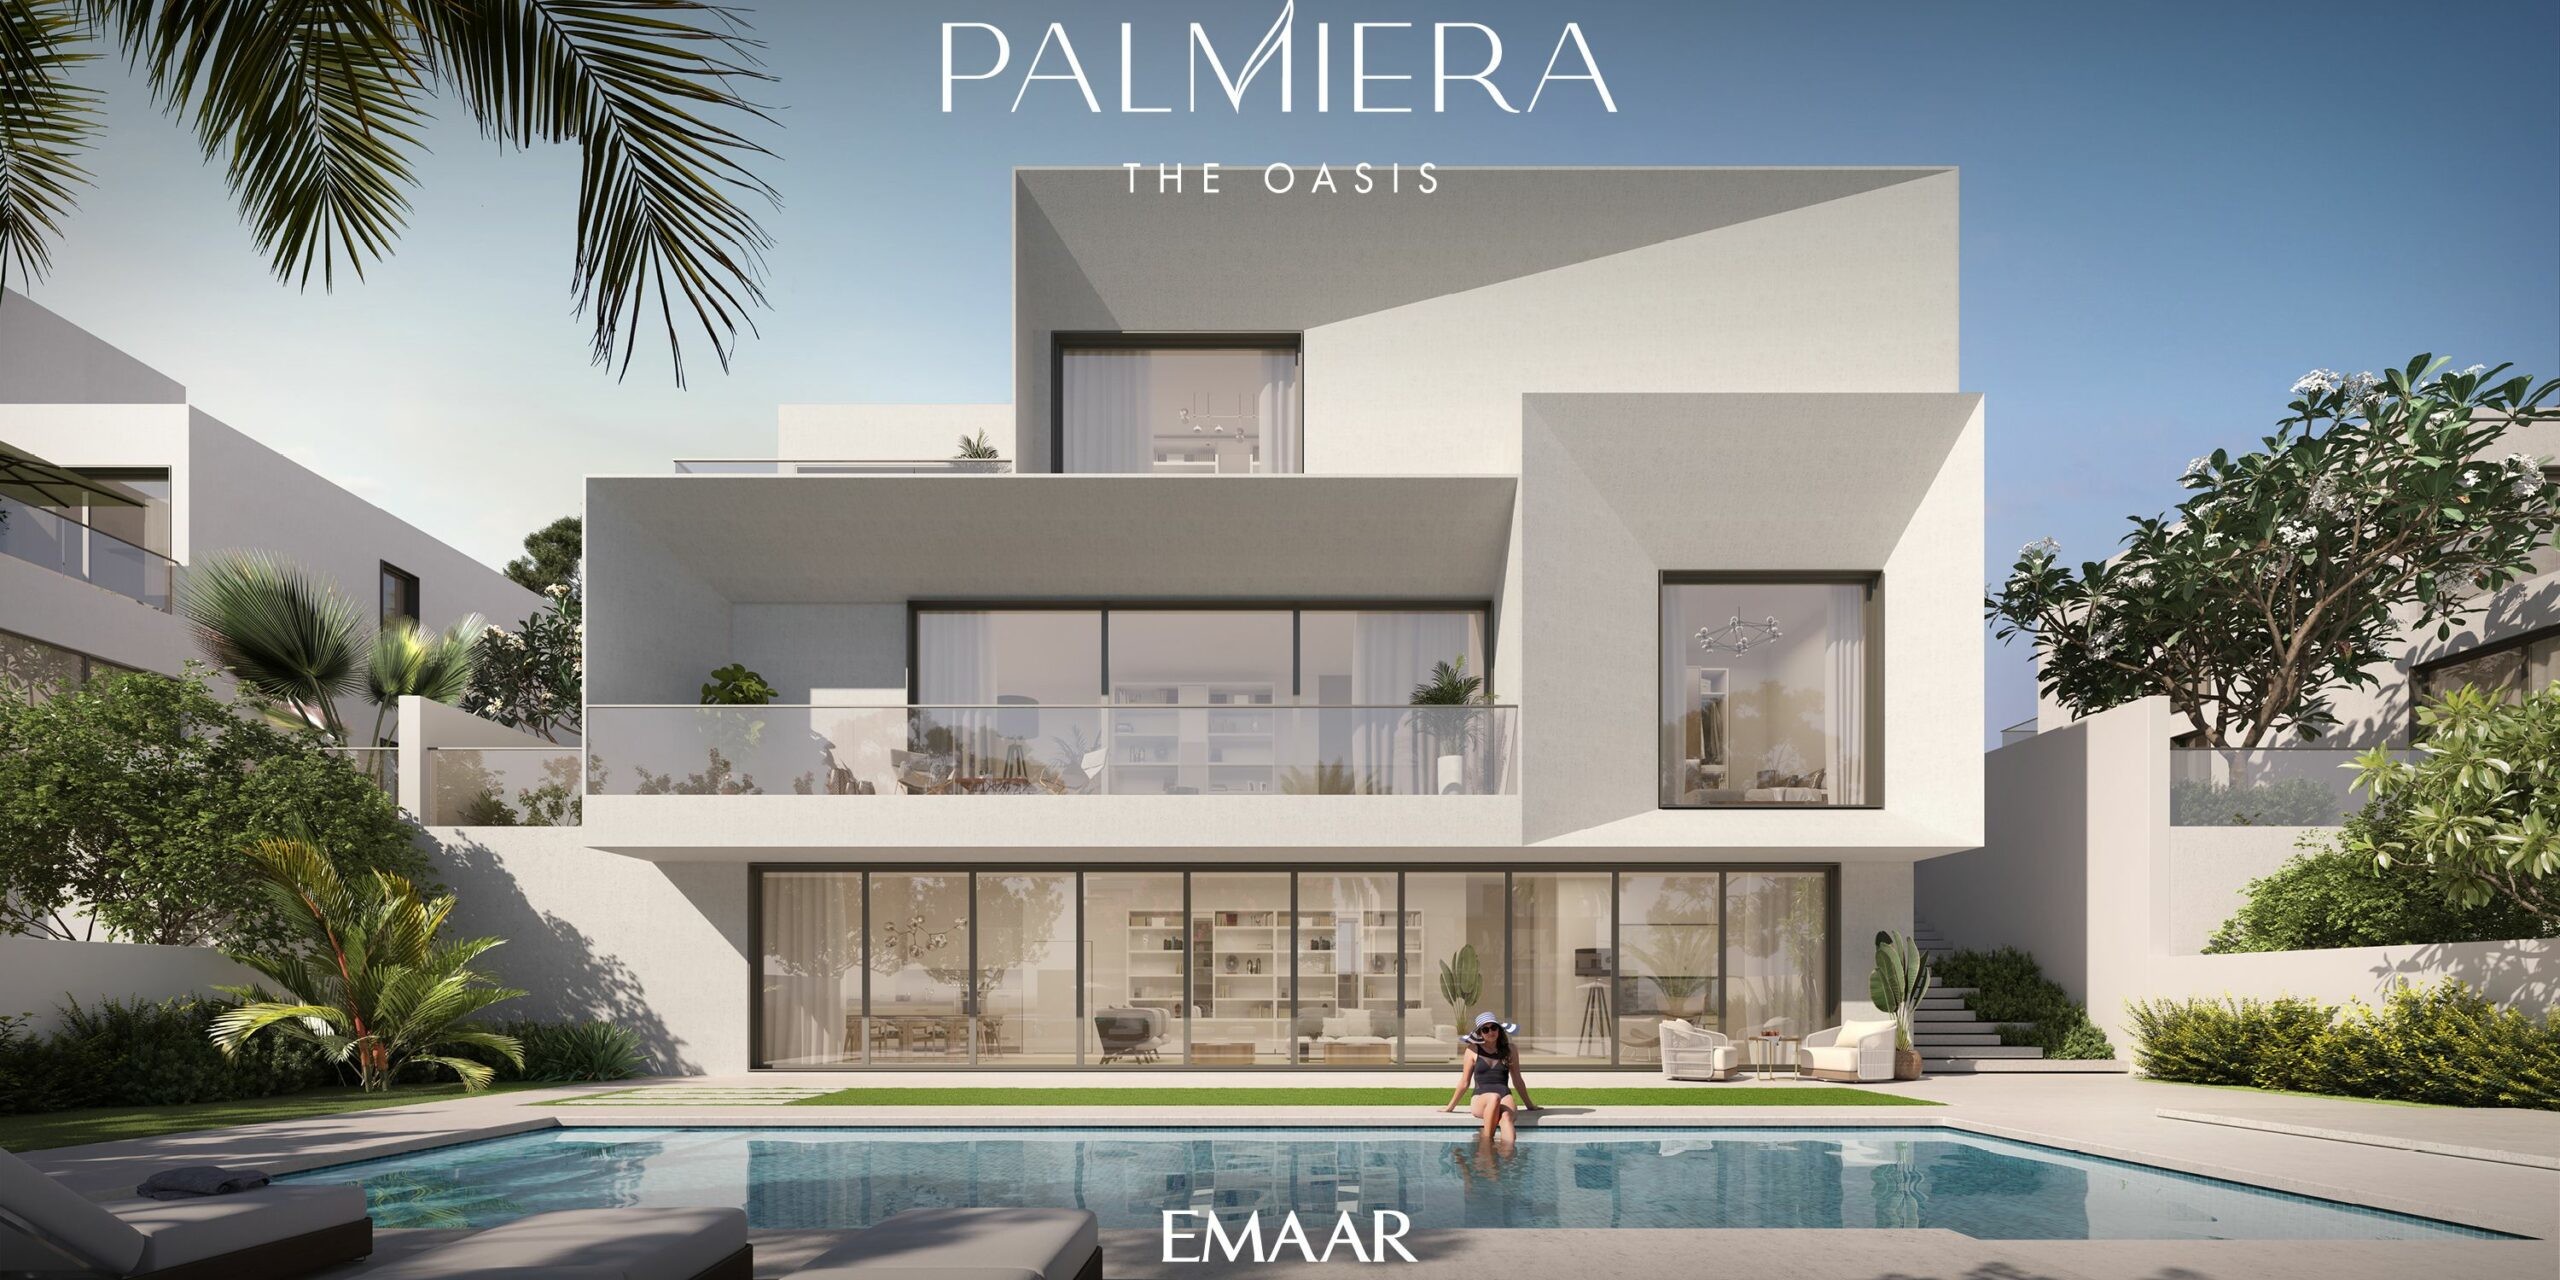 Palmiera The Oasis